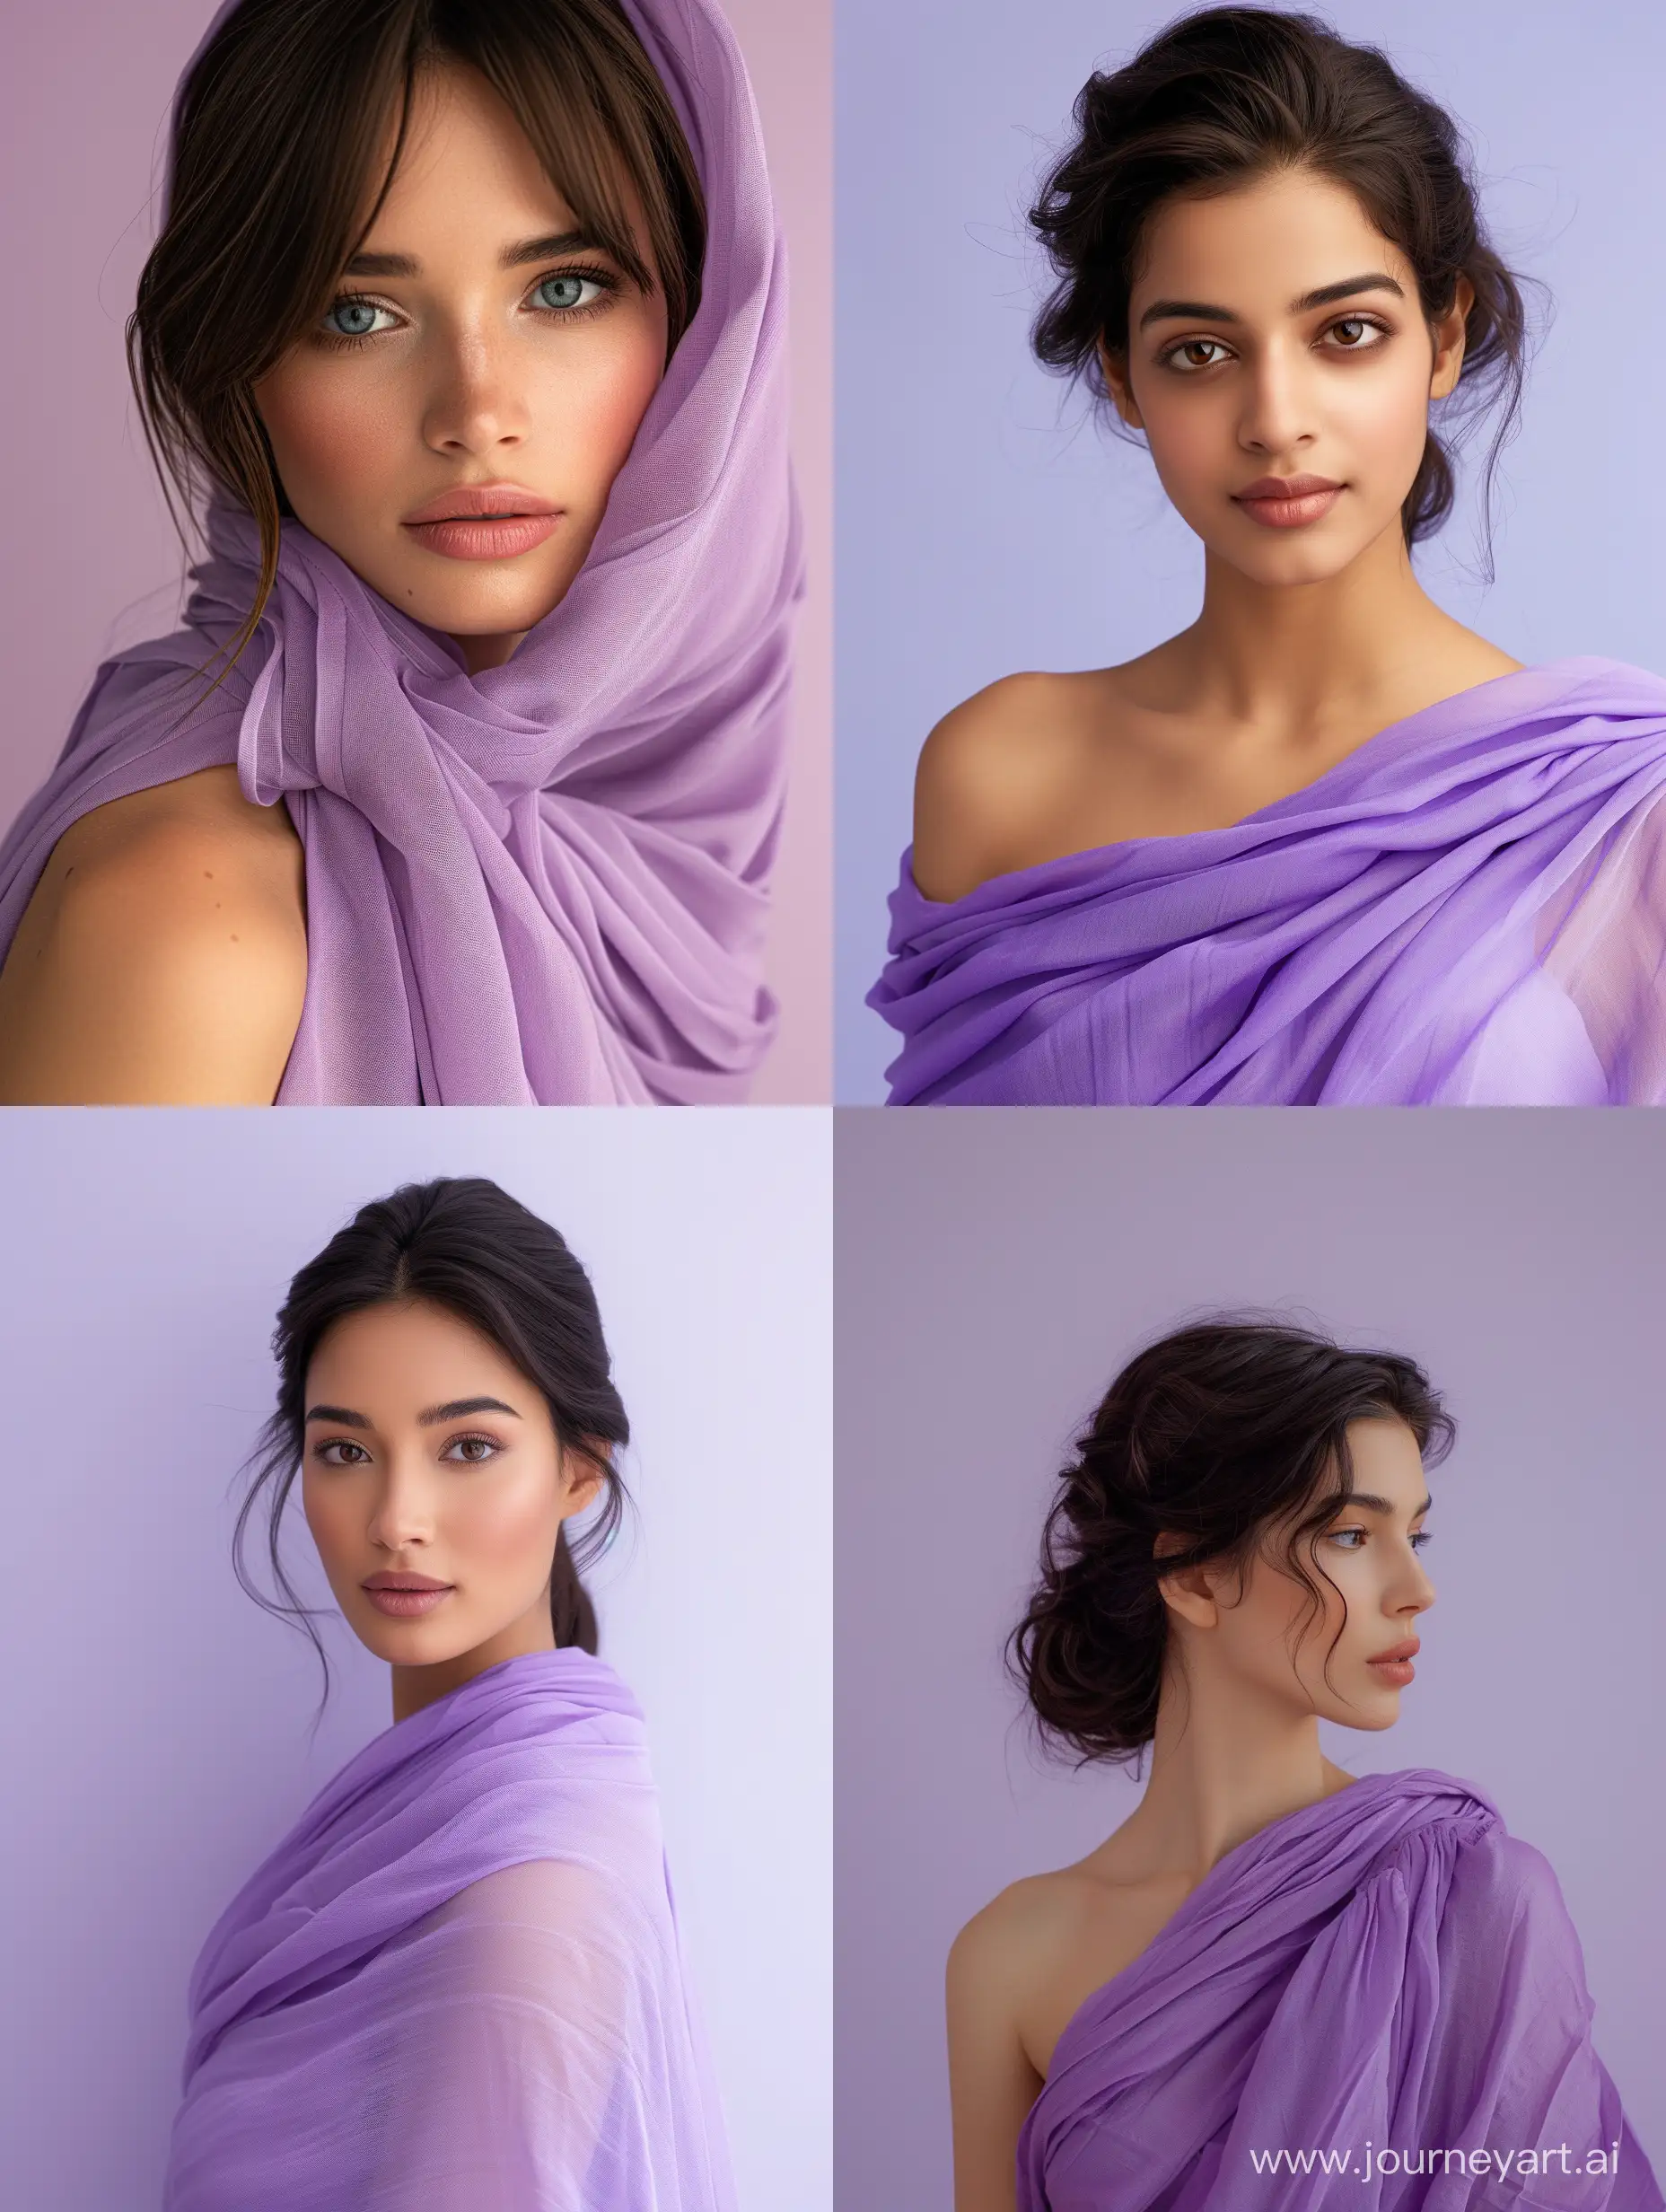 a beautiful woman who wear a purple nice clothe whose hair is not much shown, retouch, real, detail, in a monocrome simple light purple background